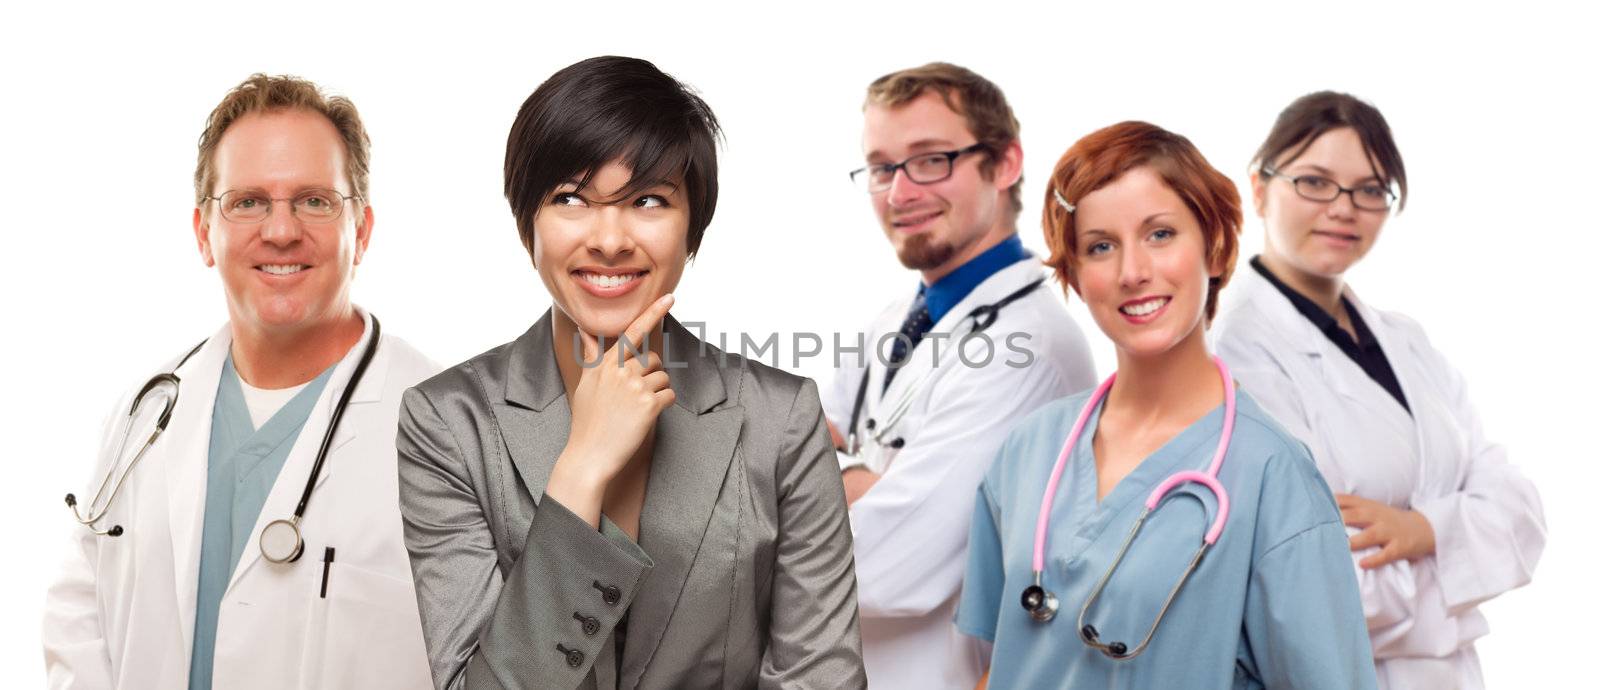 Young Mixed Race Woman with Doctors and Nurses Behind by Feverpitched